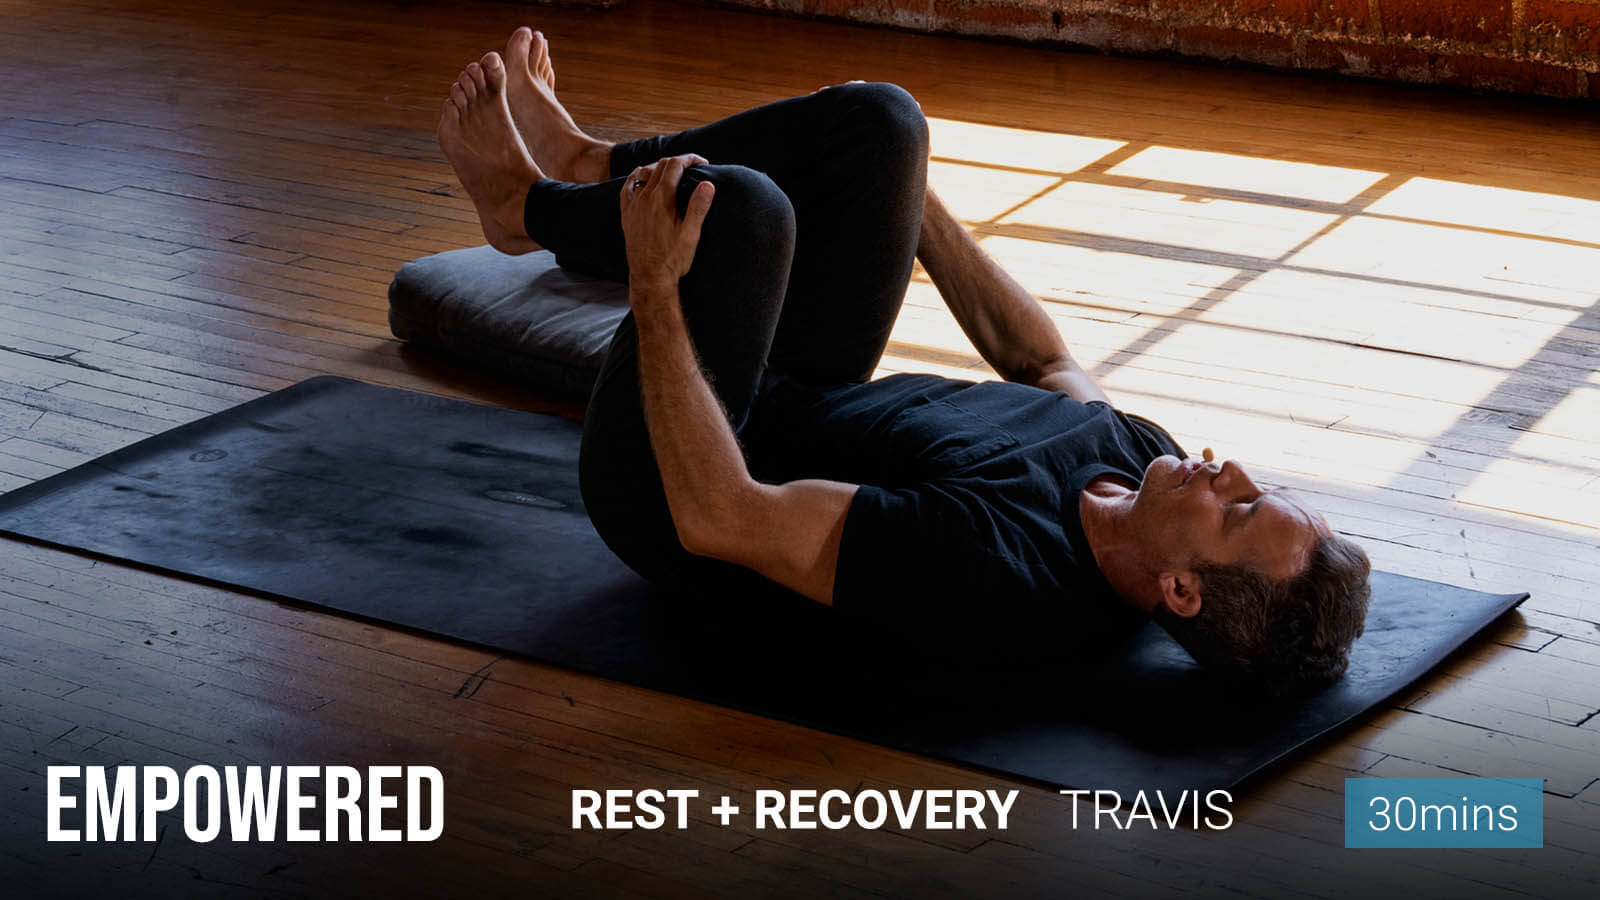 .<b>Rest</b> & Recovery.